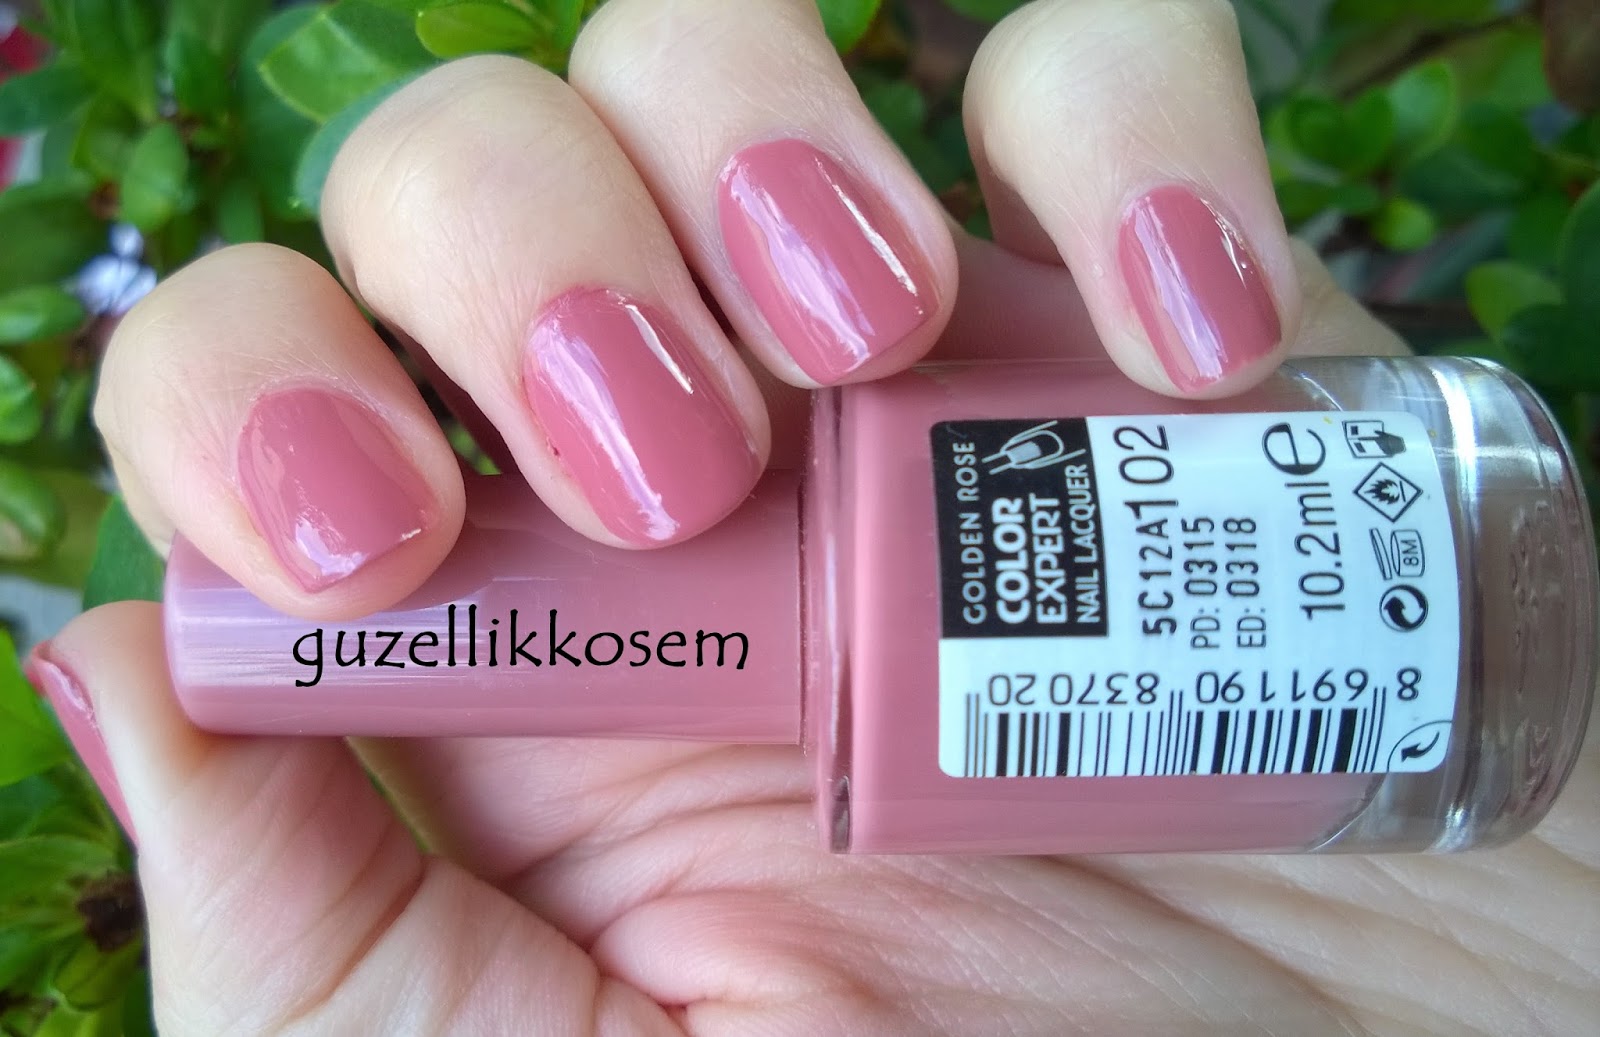 Golden Rose Color Expert Nail Lacquer 102 Review - wide 9